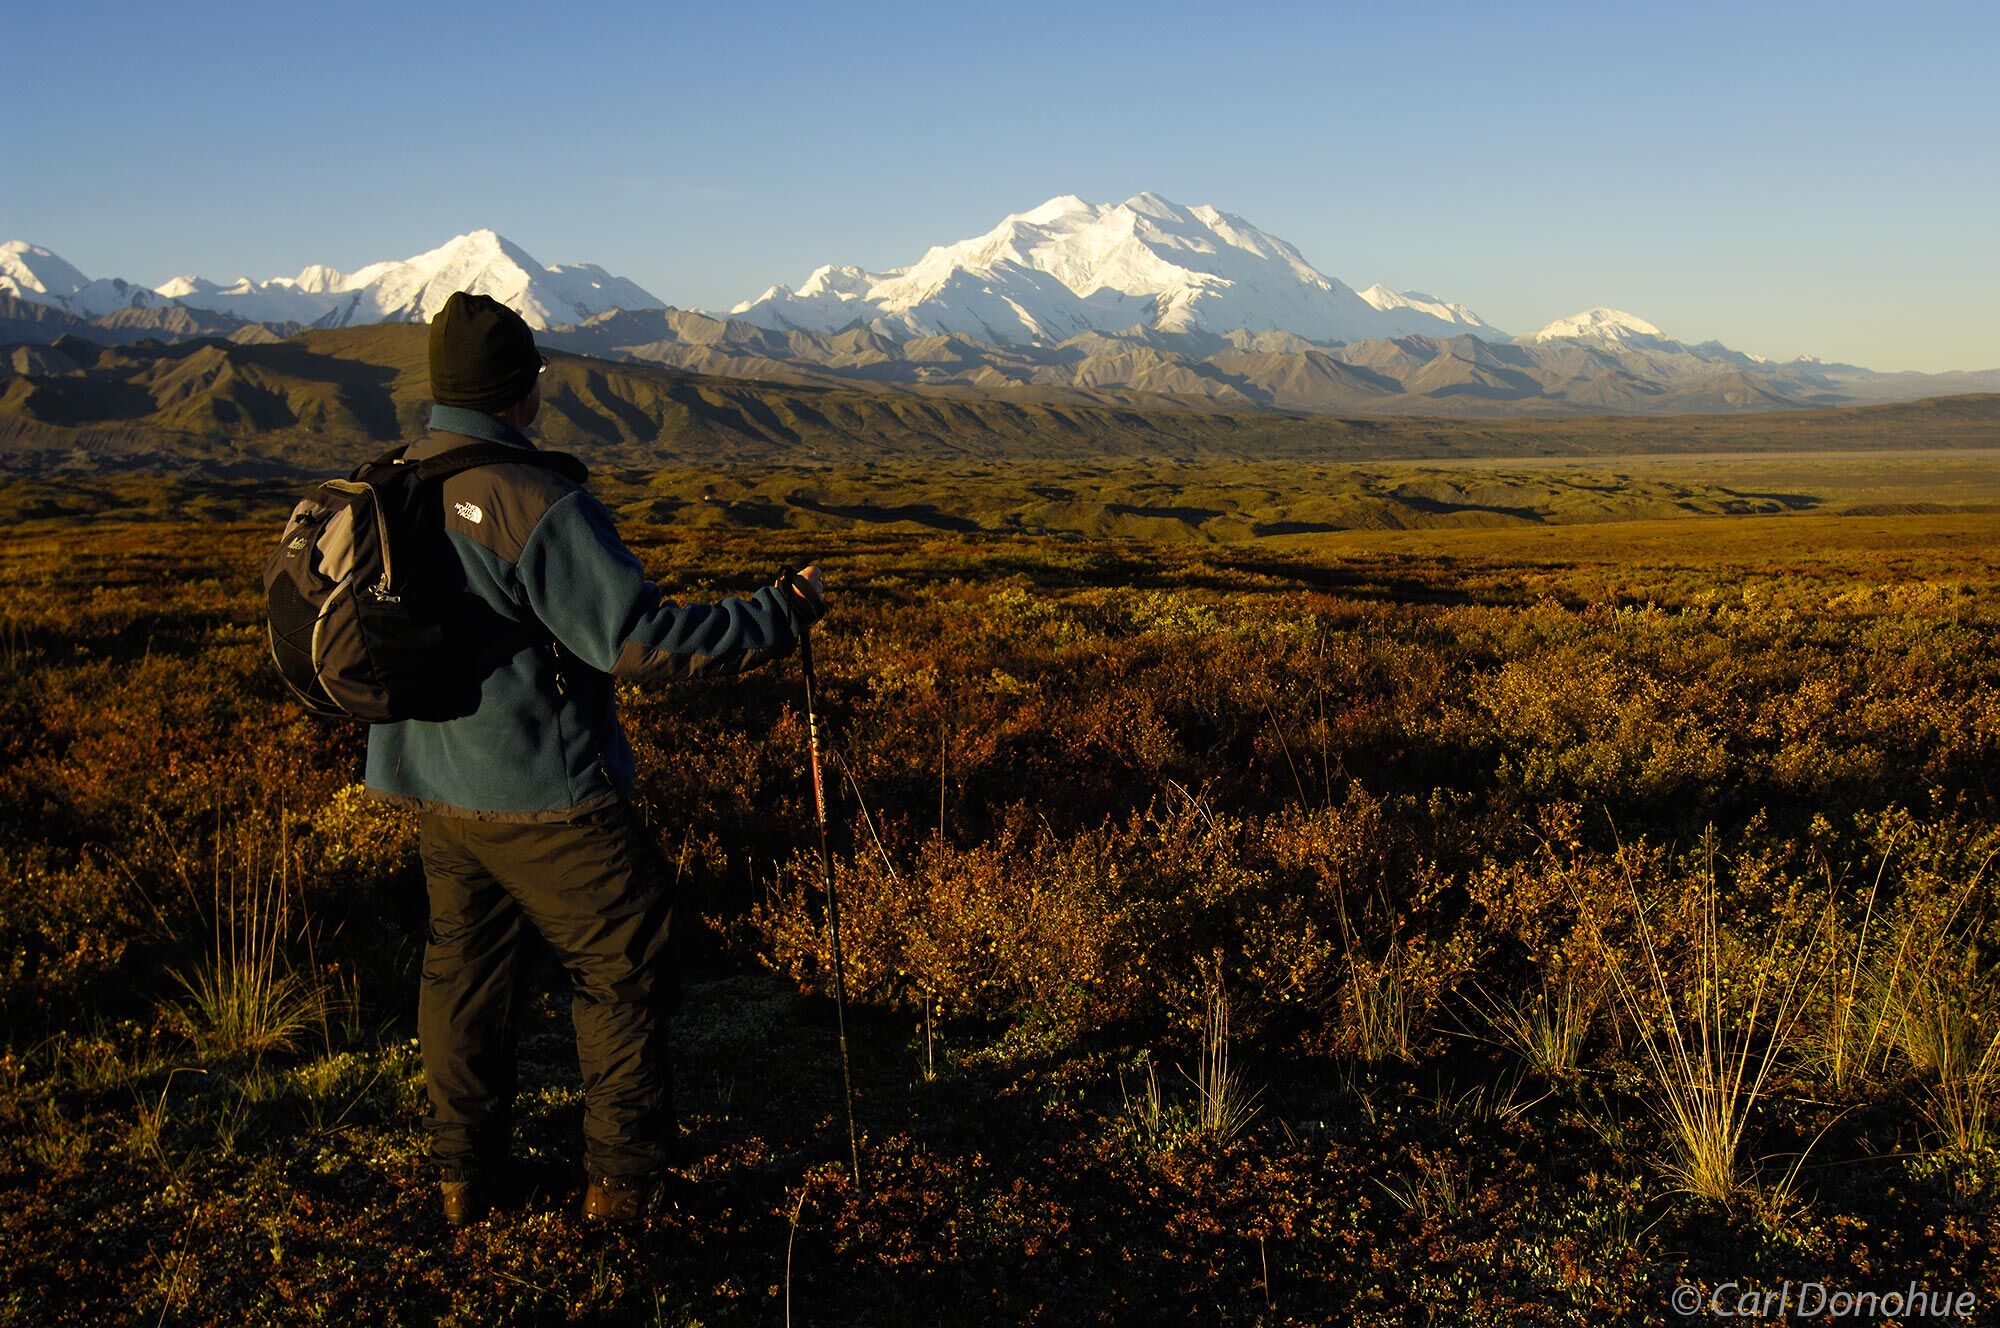 A hiker takes in the view of Mt. McKinley, known locally as "Denali" , which is a native Athabascan word translating as "The...